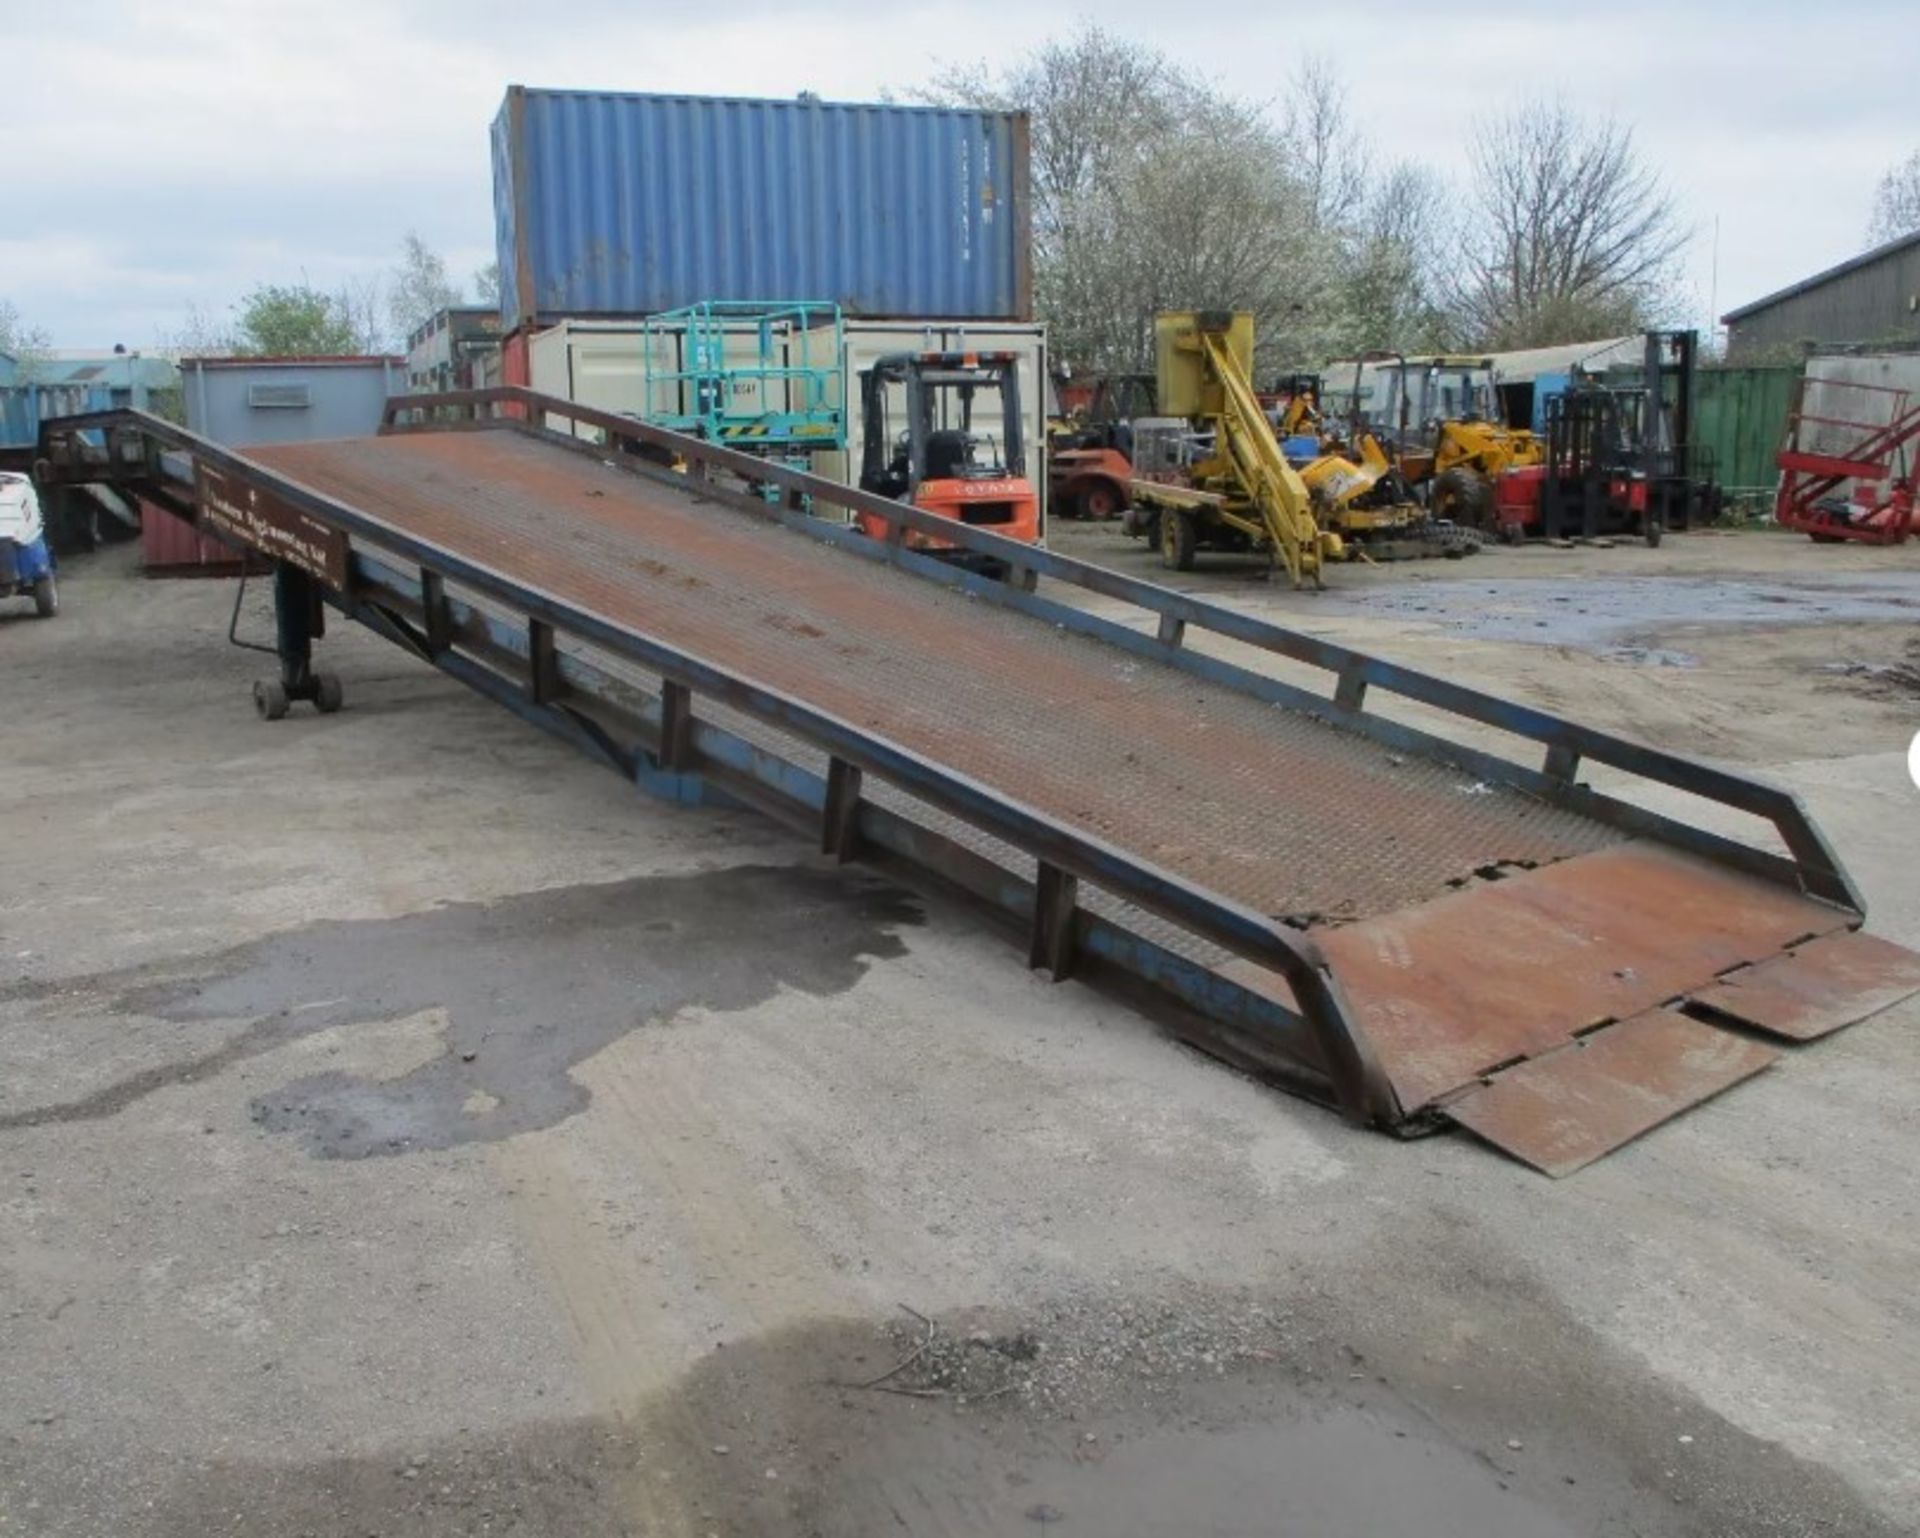 LANTERN CONTAINER LOADING RAMP - YOUR SOLUTION FOR EFFICIENT CARGO HANDLING